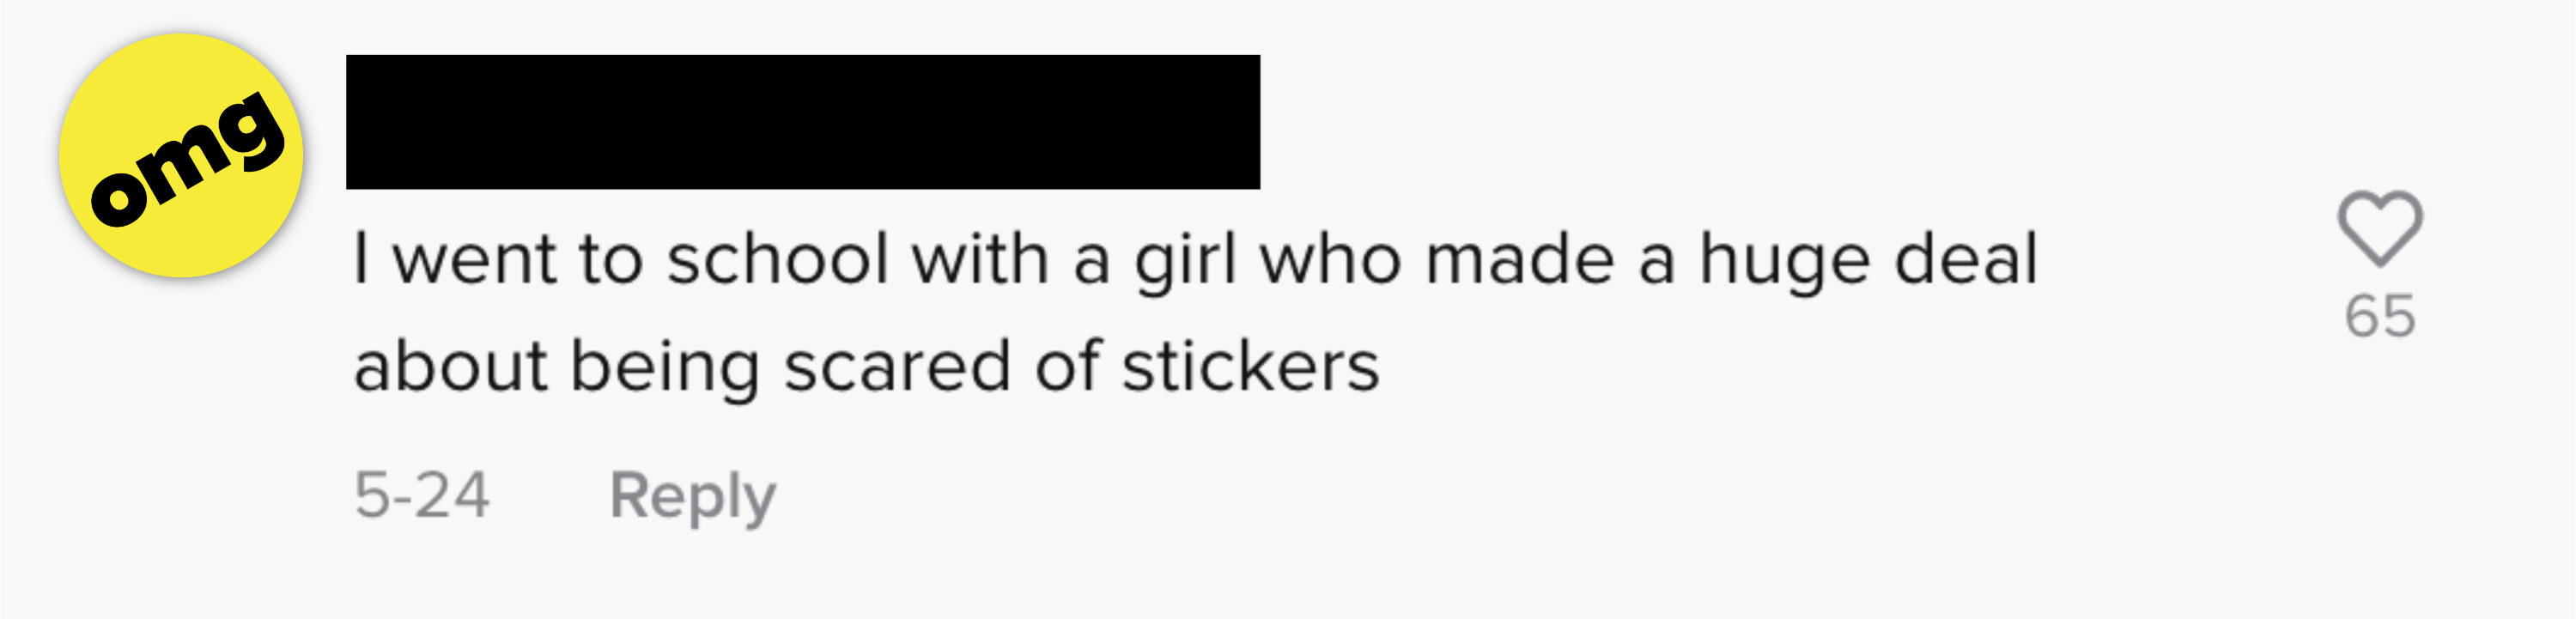 I went to school with a girl who made a huge deal about being scared of stickers